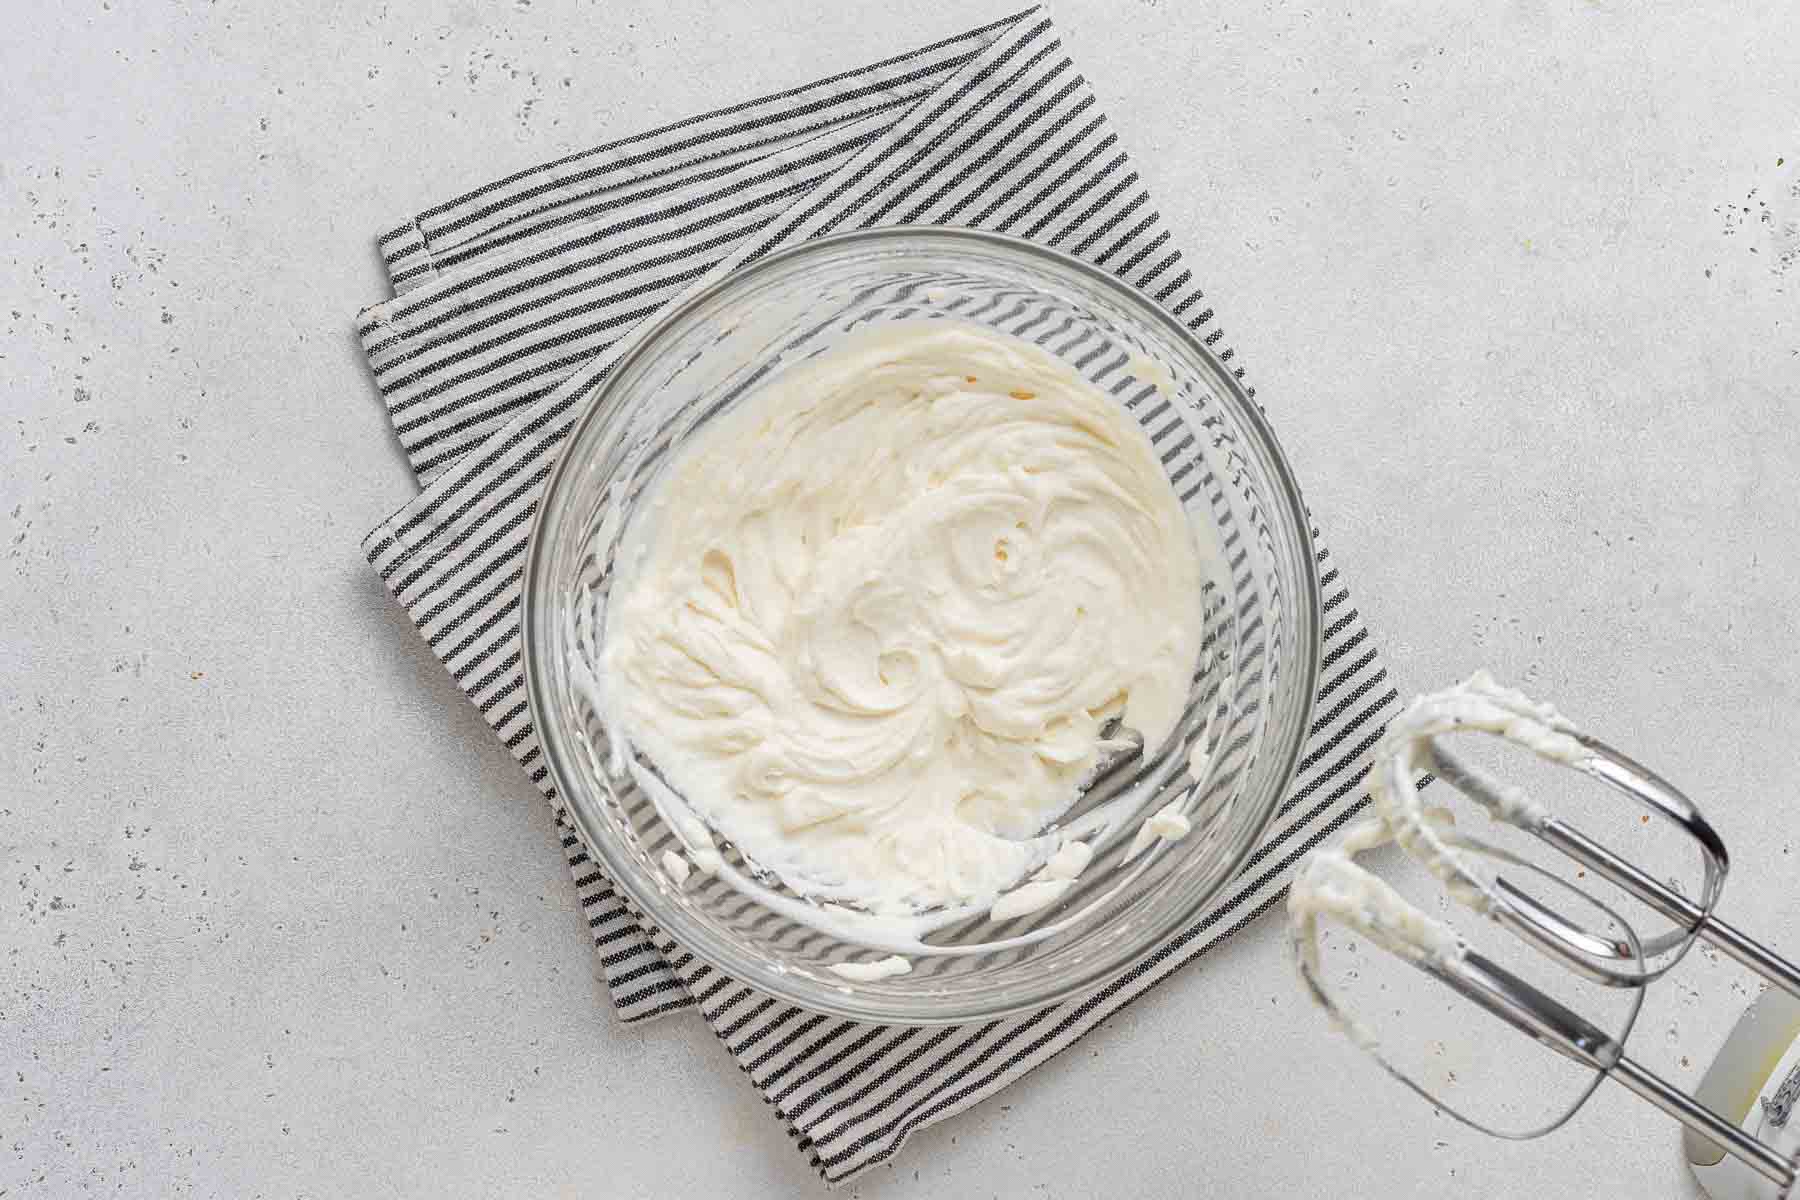 Freshly whipped cream in bowl with mixer.